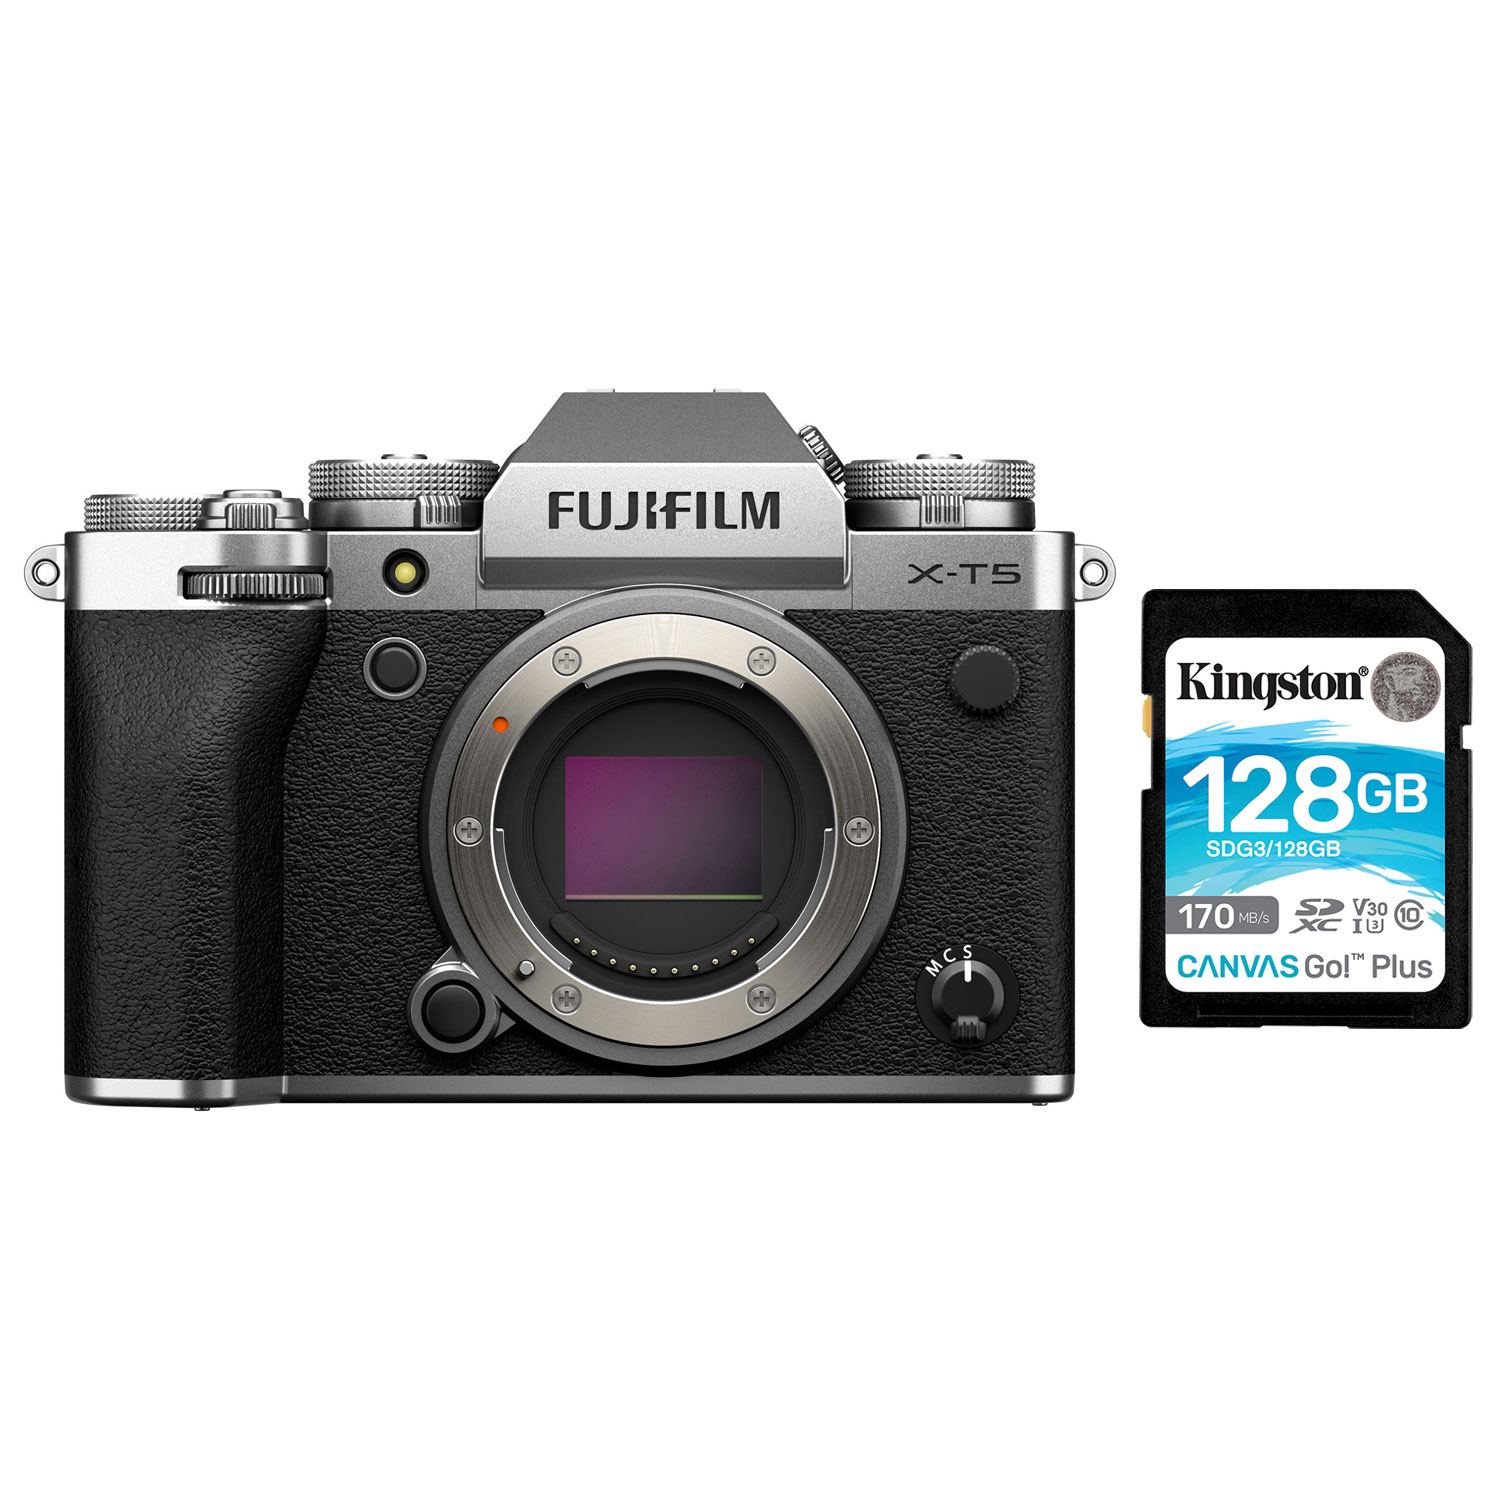 Fujifilm X-T5 Mirrorless Camera (Body Only) with 128GB 170MB/s SDXC Memory Card - Silver